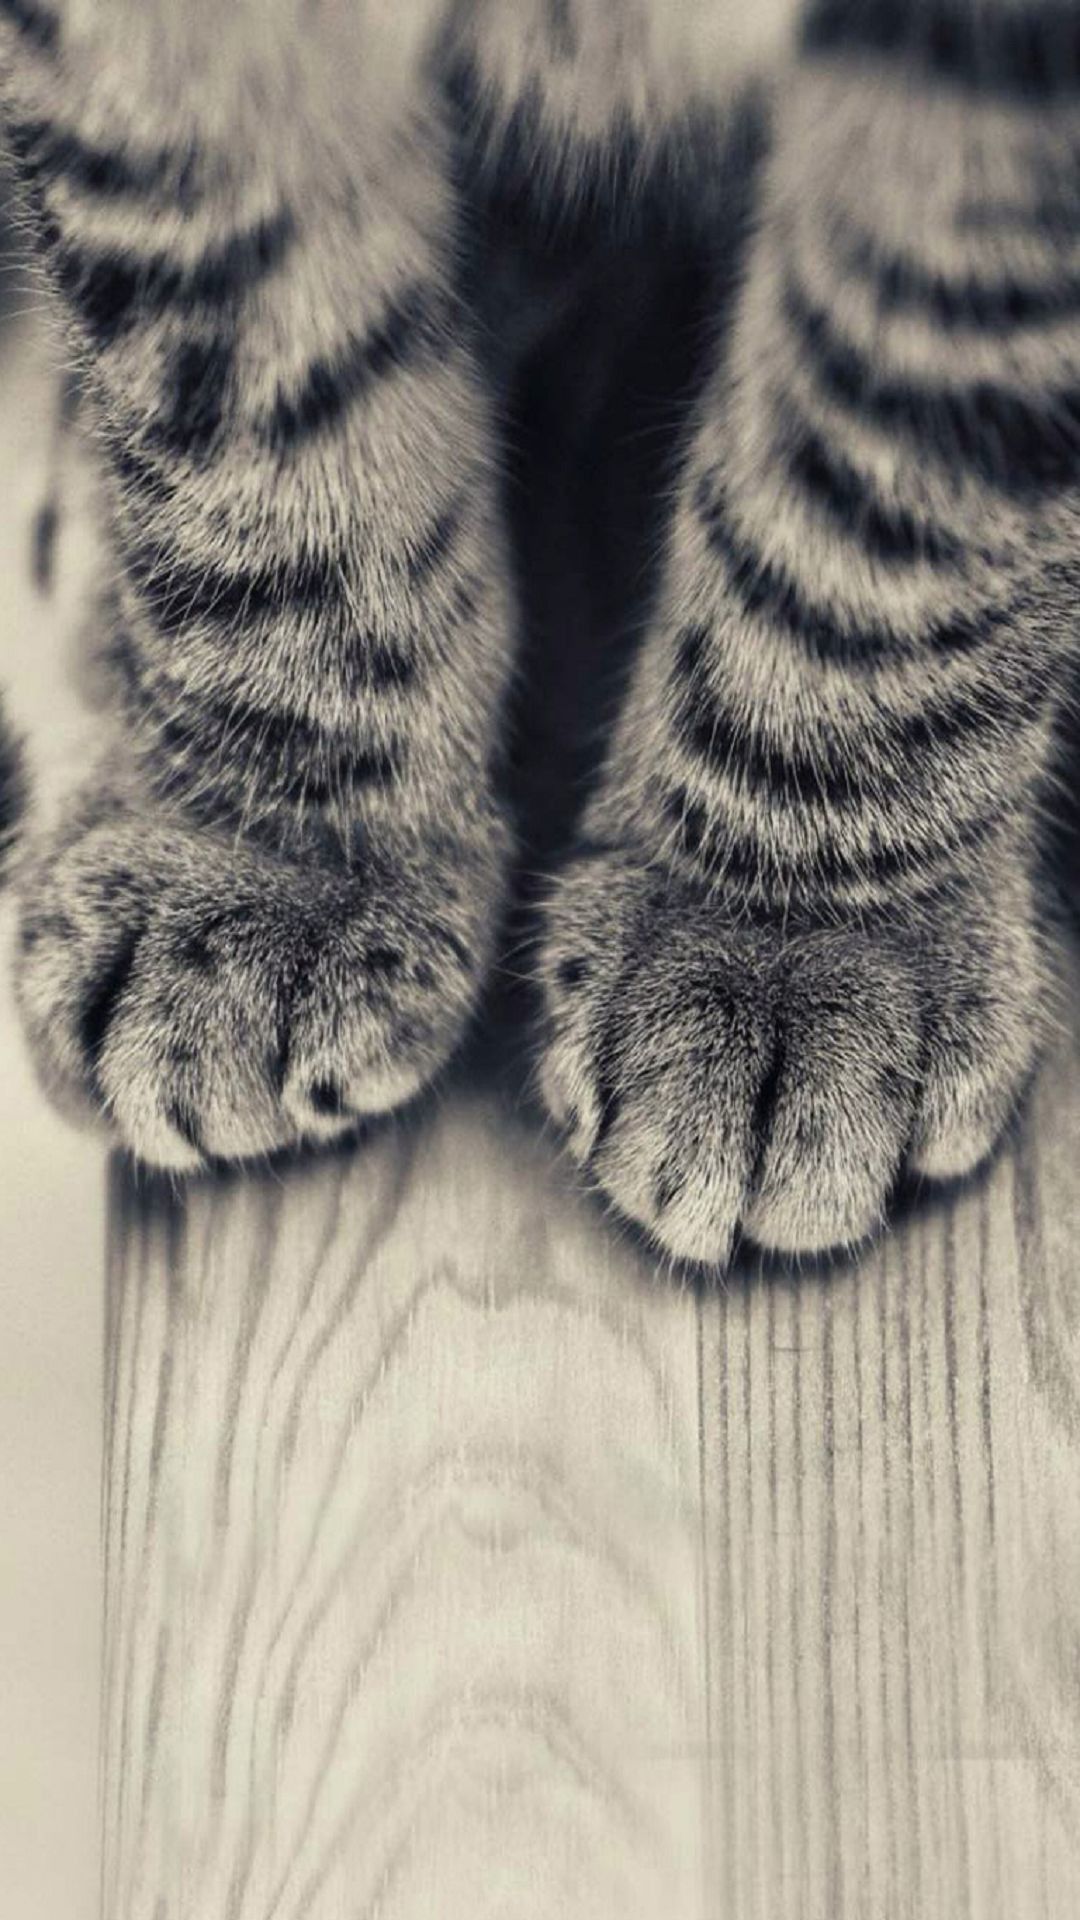 Gray Striped Kitten Legs Cat Android Wallpapers free download